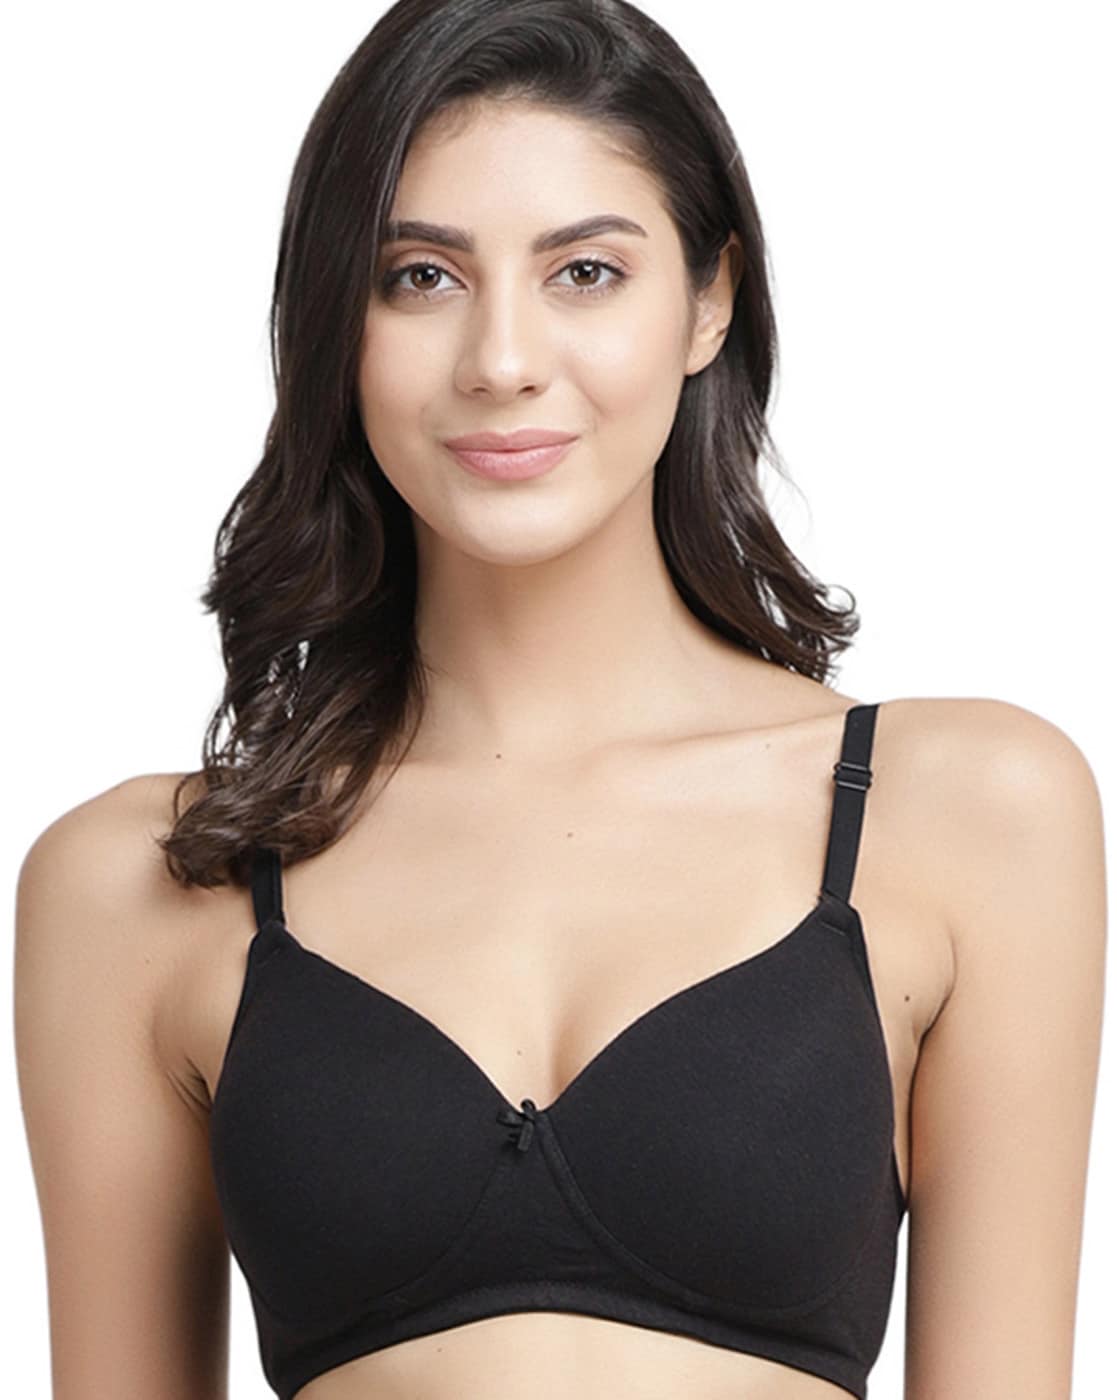 Full Coverage Total-Support Bra